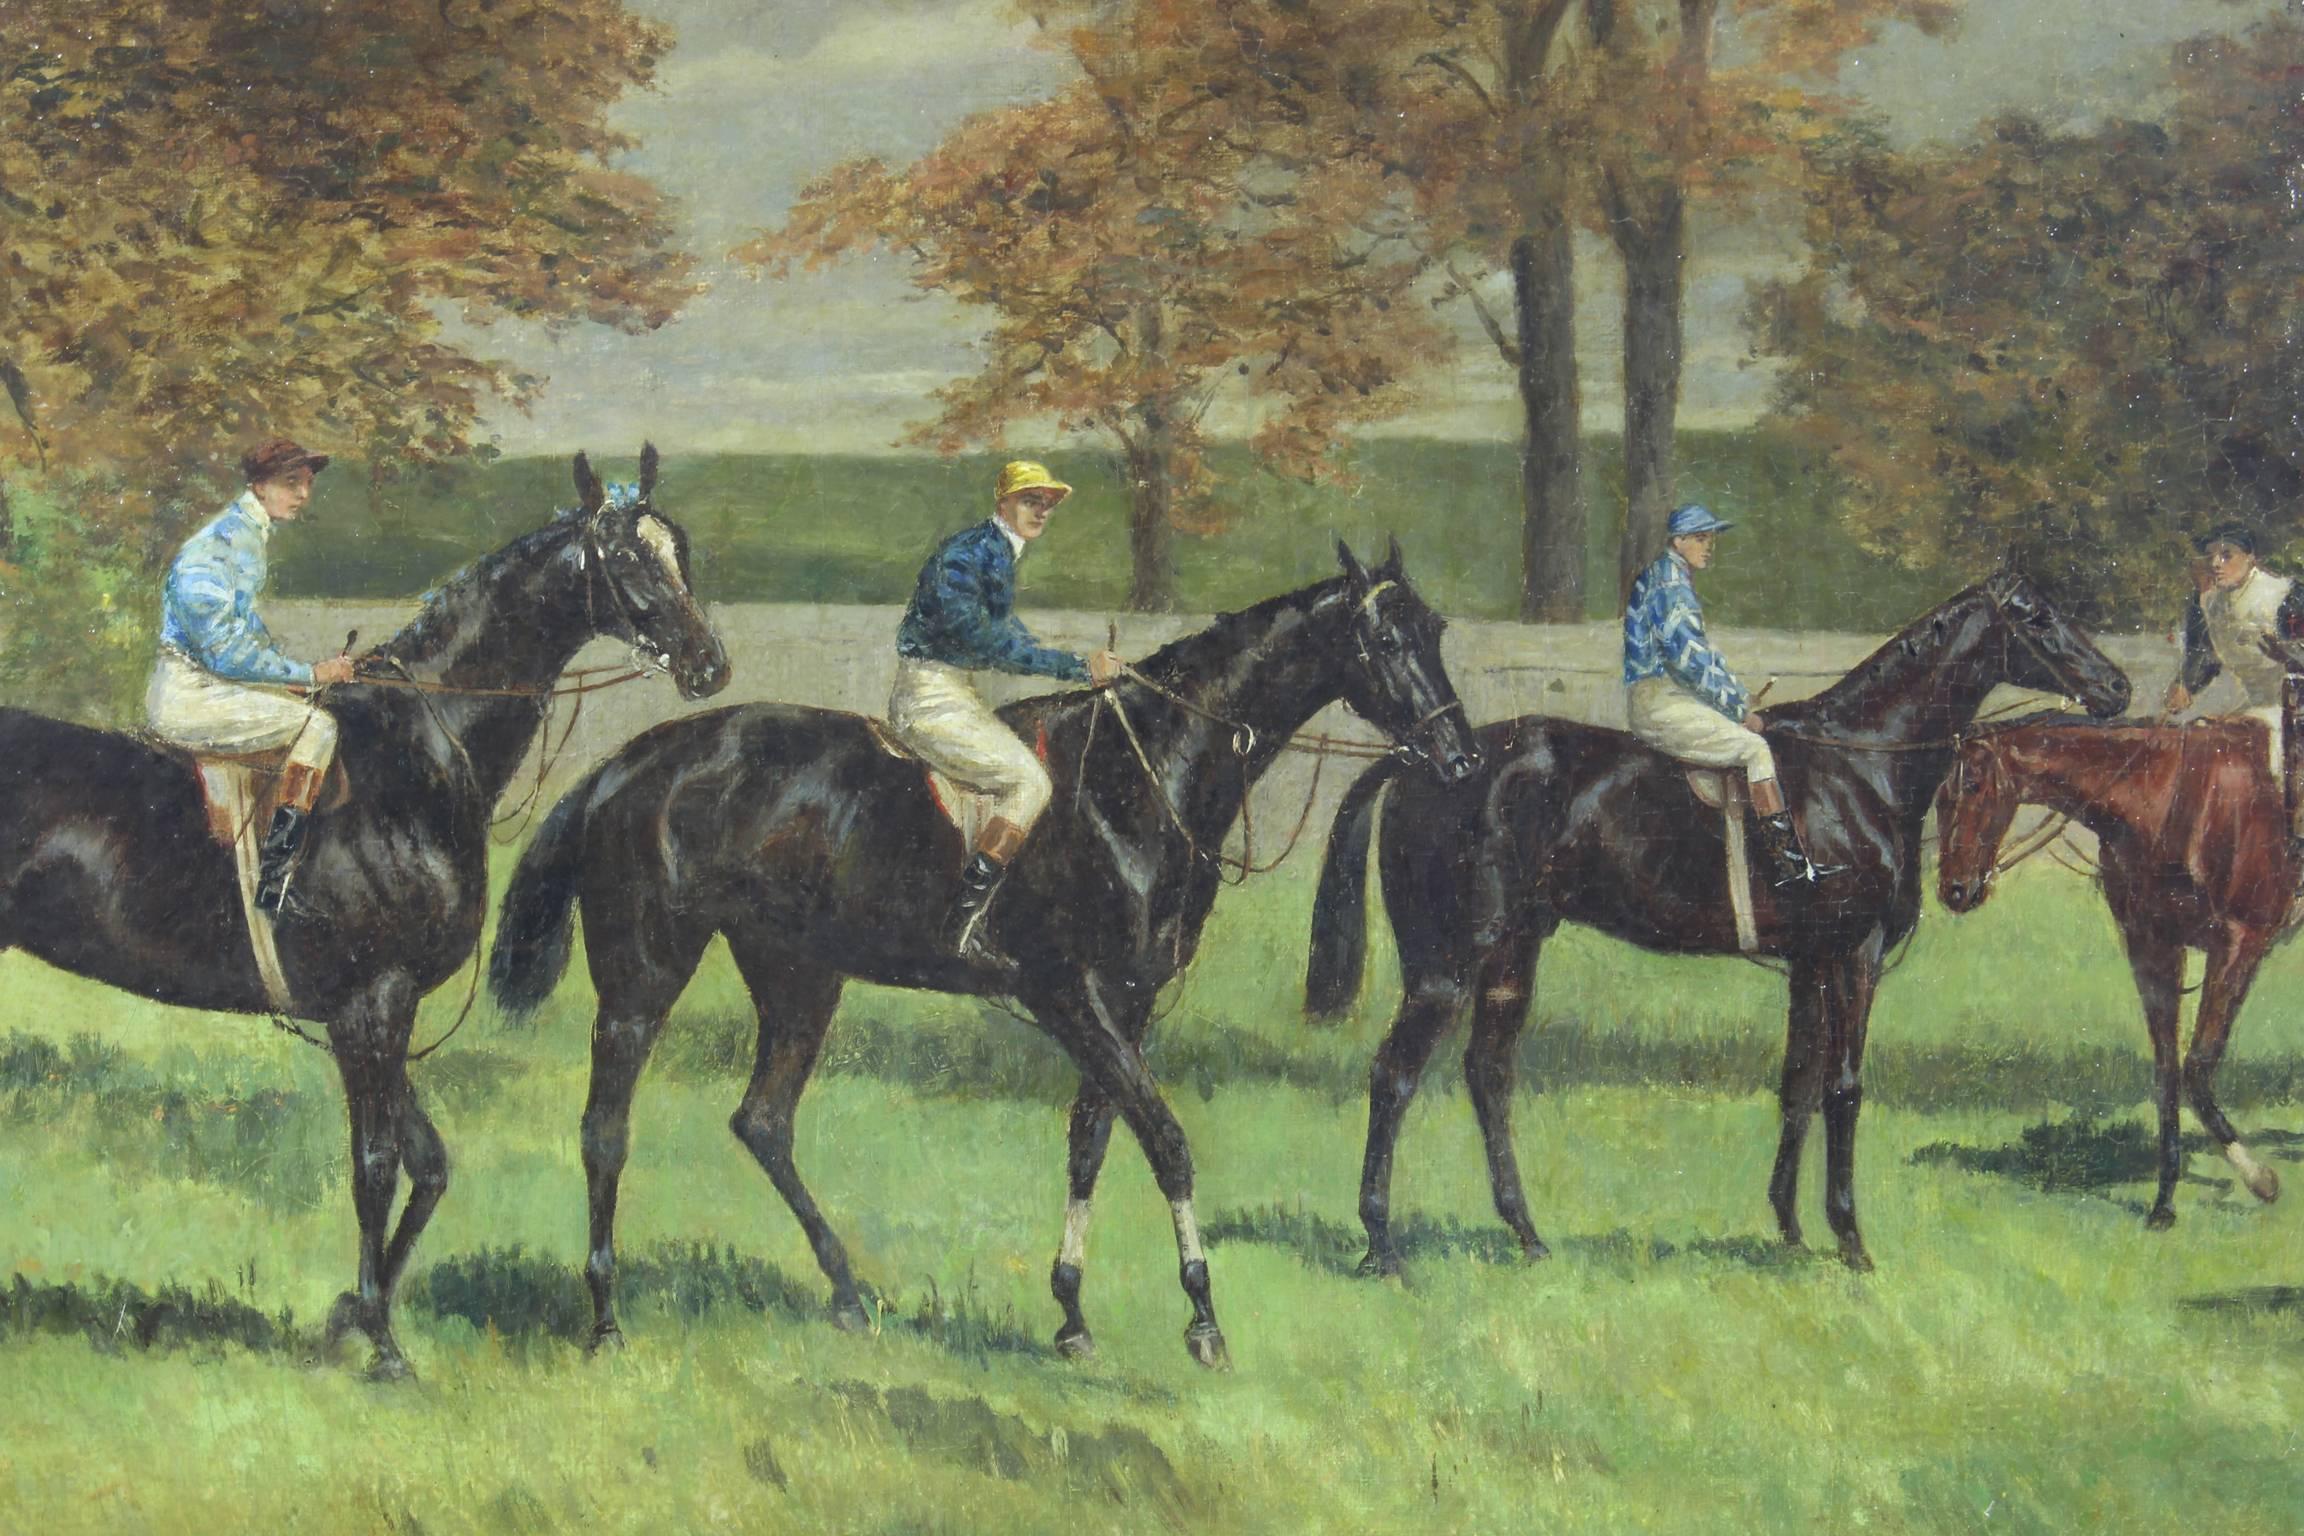 Sporting Art Early 20th Century Oil on Canvas Sporting Painting by John Beer